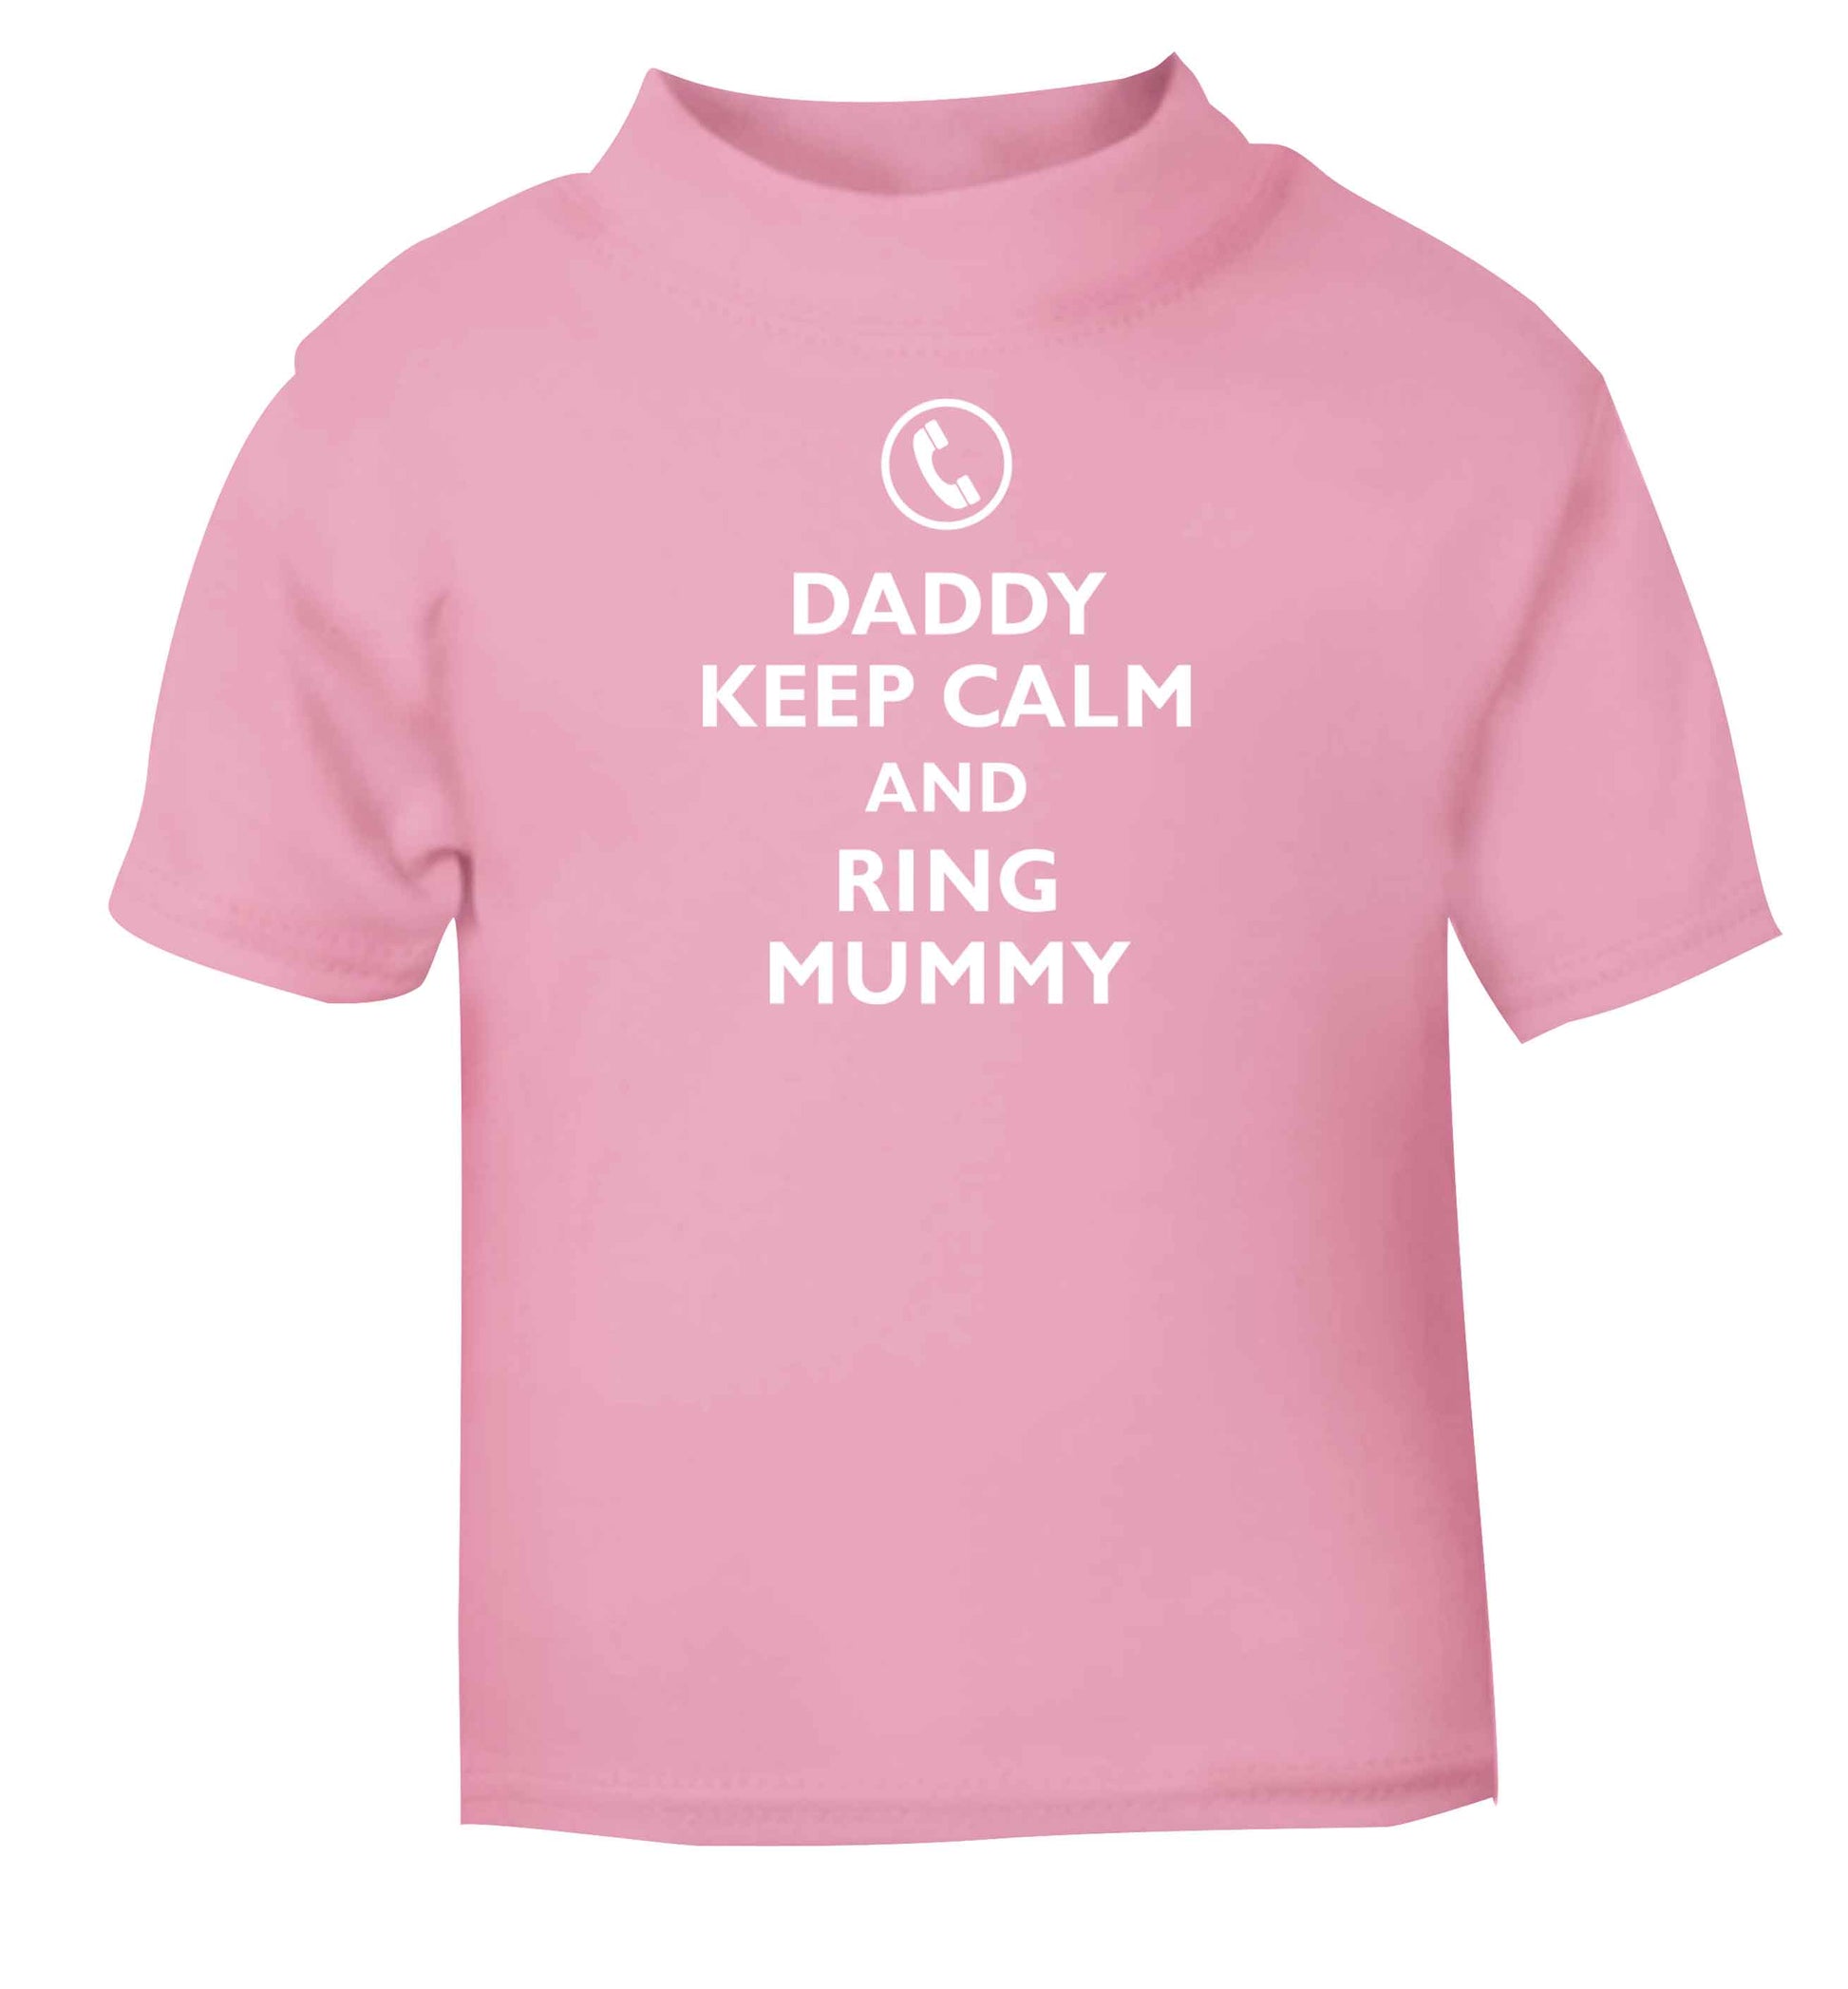 Daddy keep calm and ring mummy light pink baby toddler Tshirt 2 Years